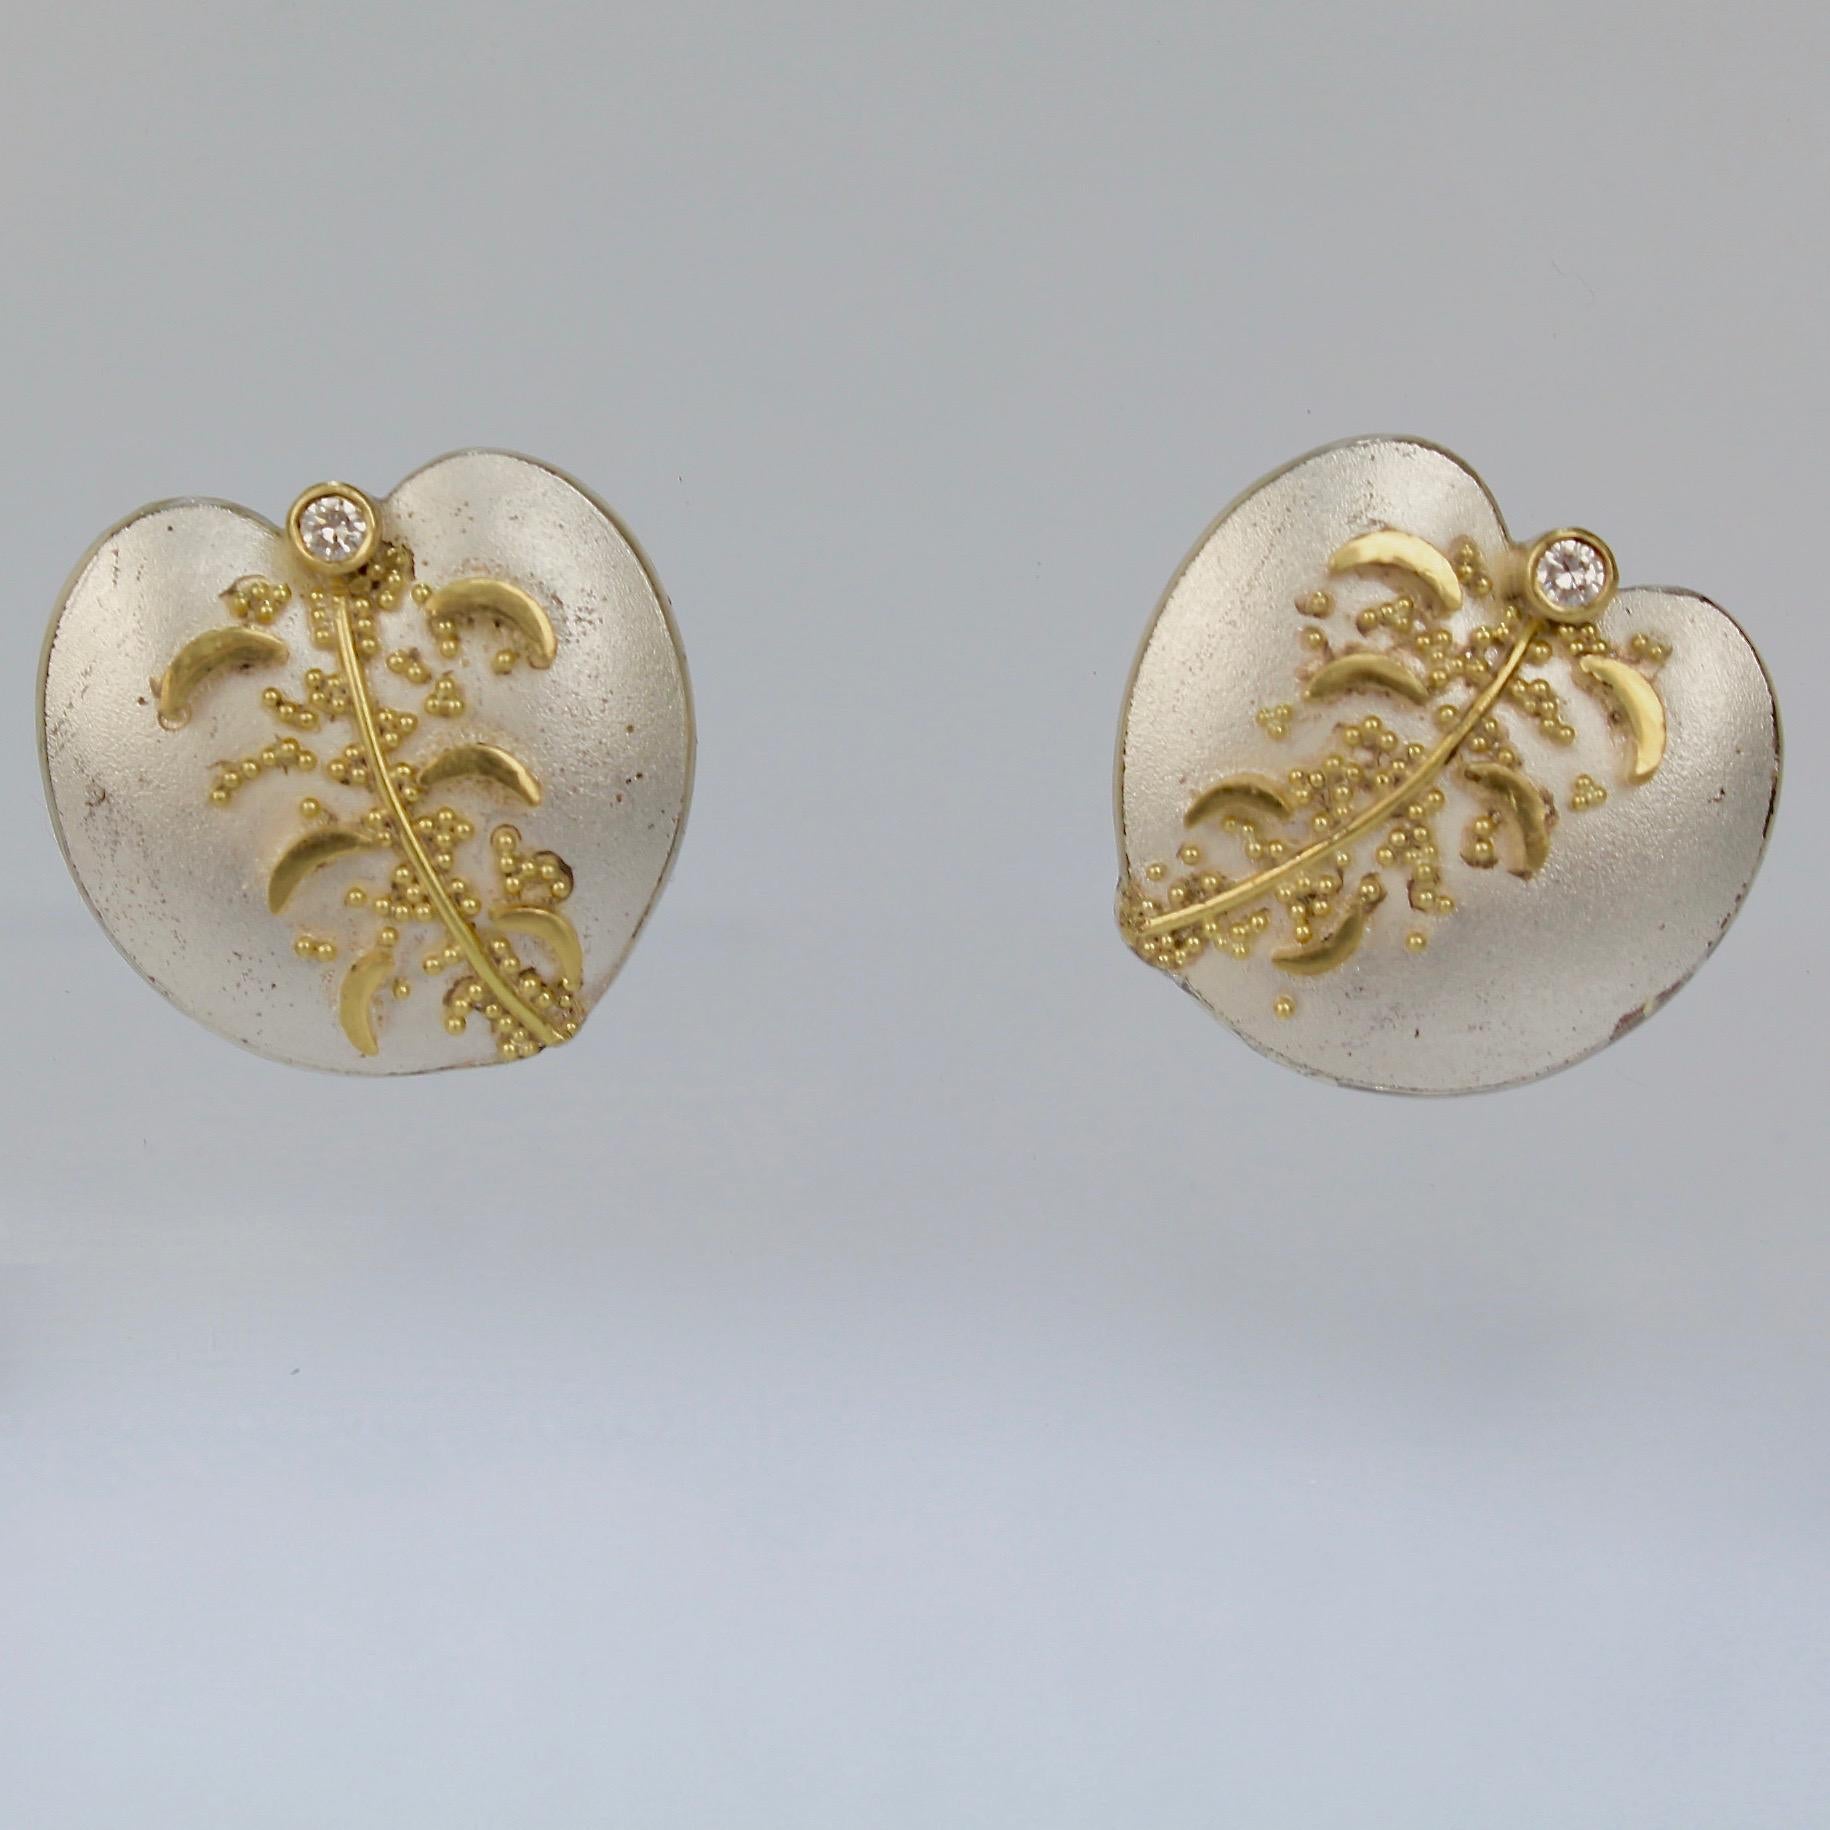 A wonderful pair of Cornelia Goldsmith stylized leaf form earrings.

Each in sterling silver with high karat granulated gold beads and set with a small round white diamond.

Goldsmith is a renowned California contemporary jewelry maker and a member